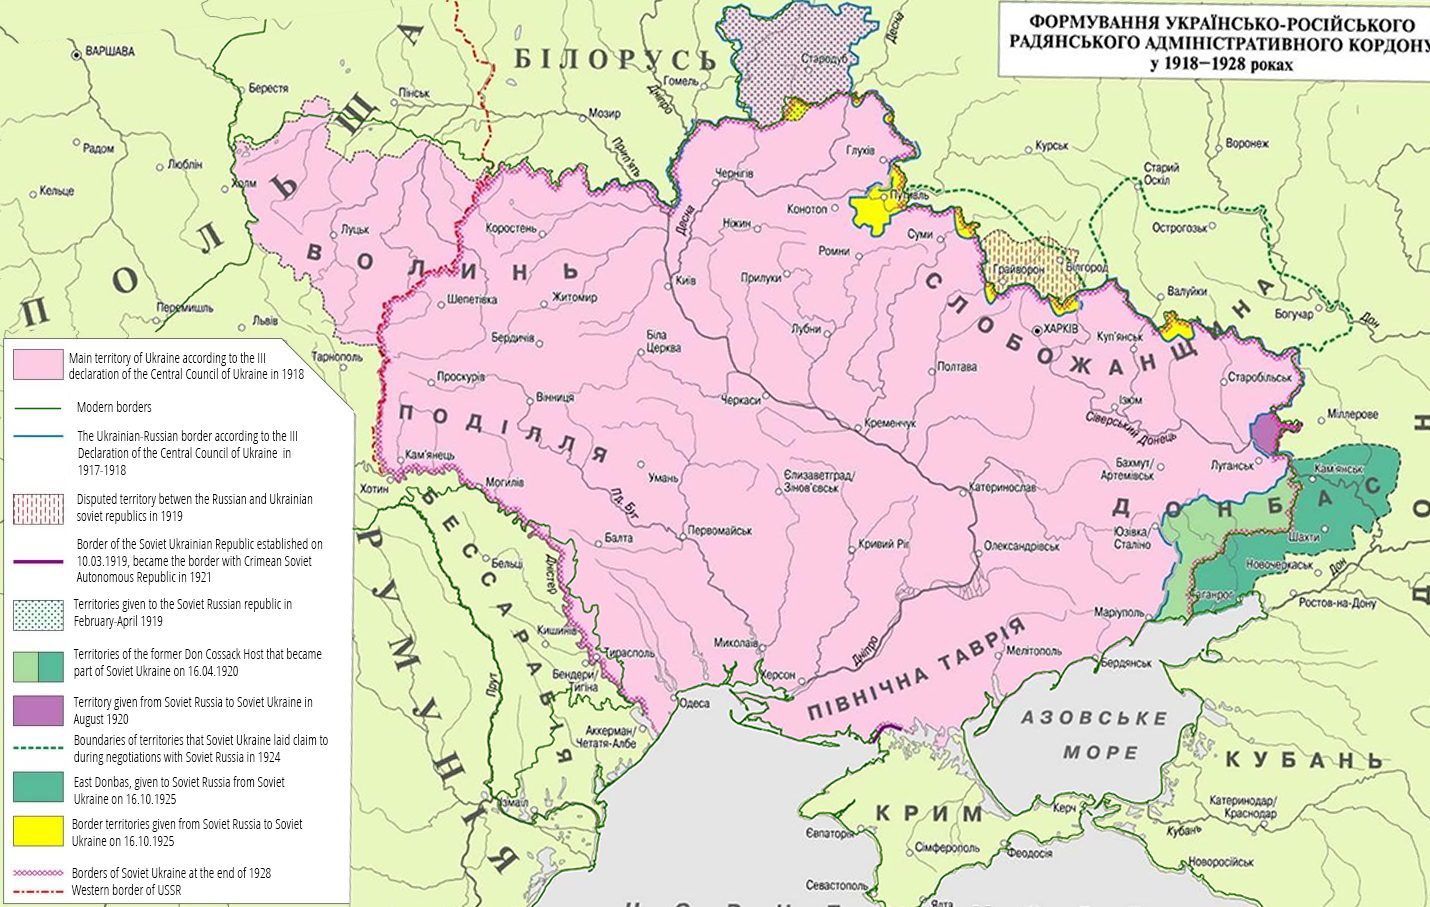 5 facts about “Novorossiya” you won’t learn in a Russian history class ...